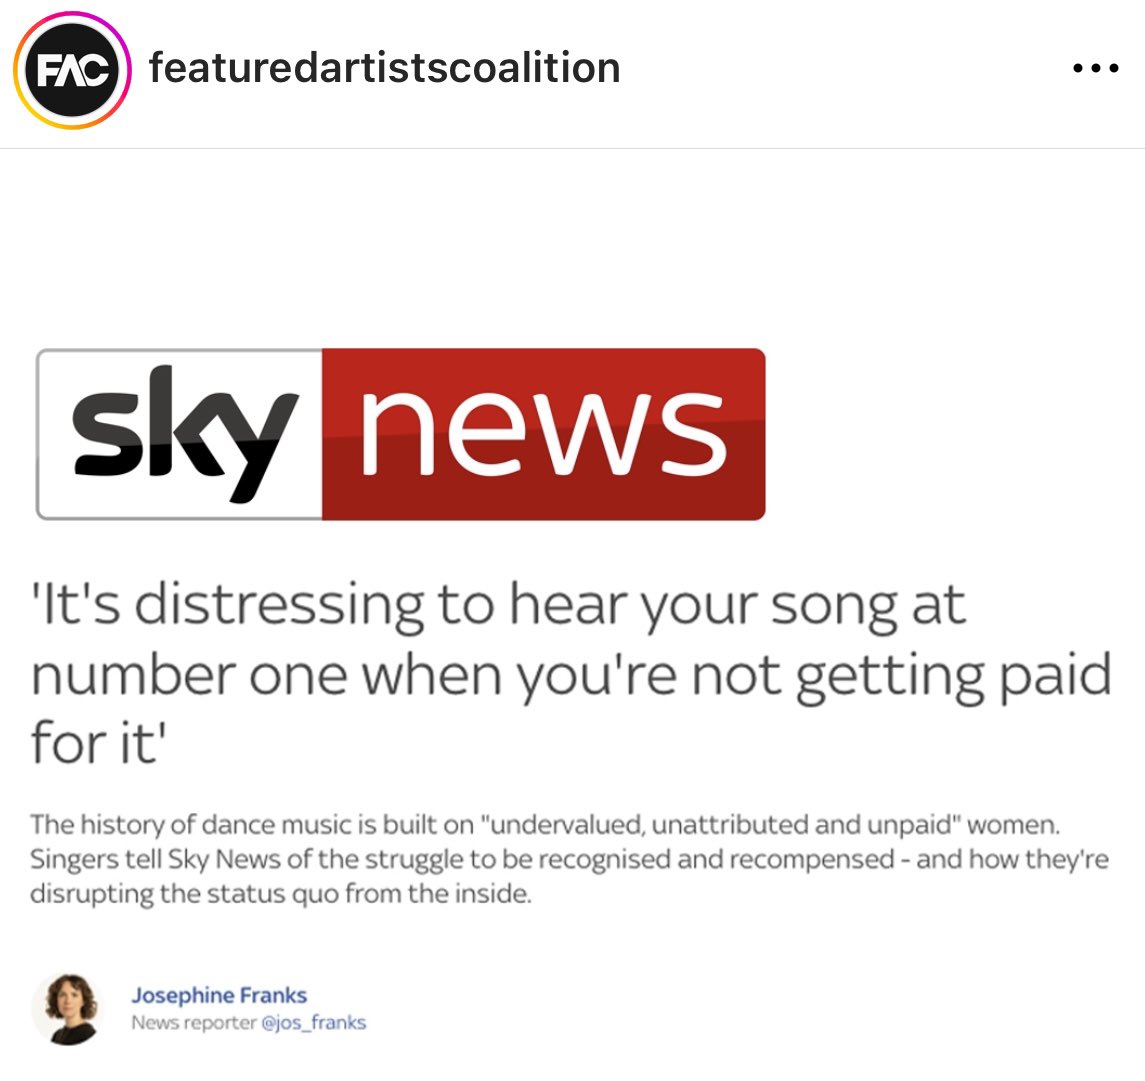 On #internationalwomensday solidarity with our sister singers and musicians fighting this. The music biz is often full of entitled careerists and the closing of ranks often takes the biscuit @Jos_Franks @alunaaa @kellileighuk news.sky.com/story/its-dist…